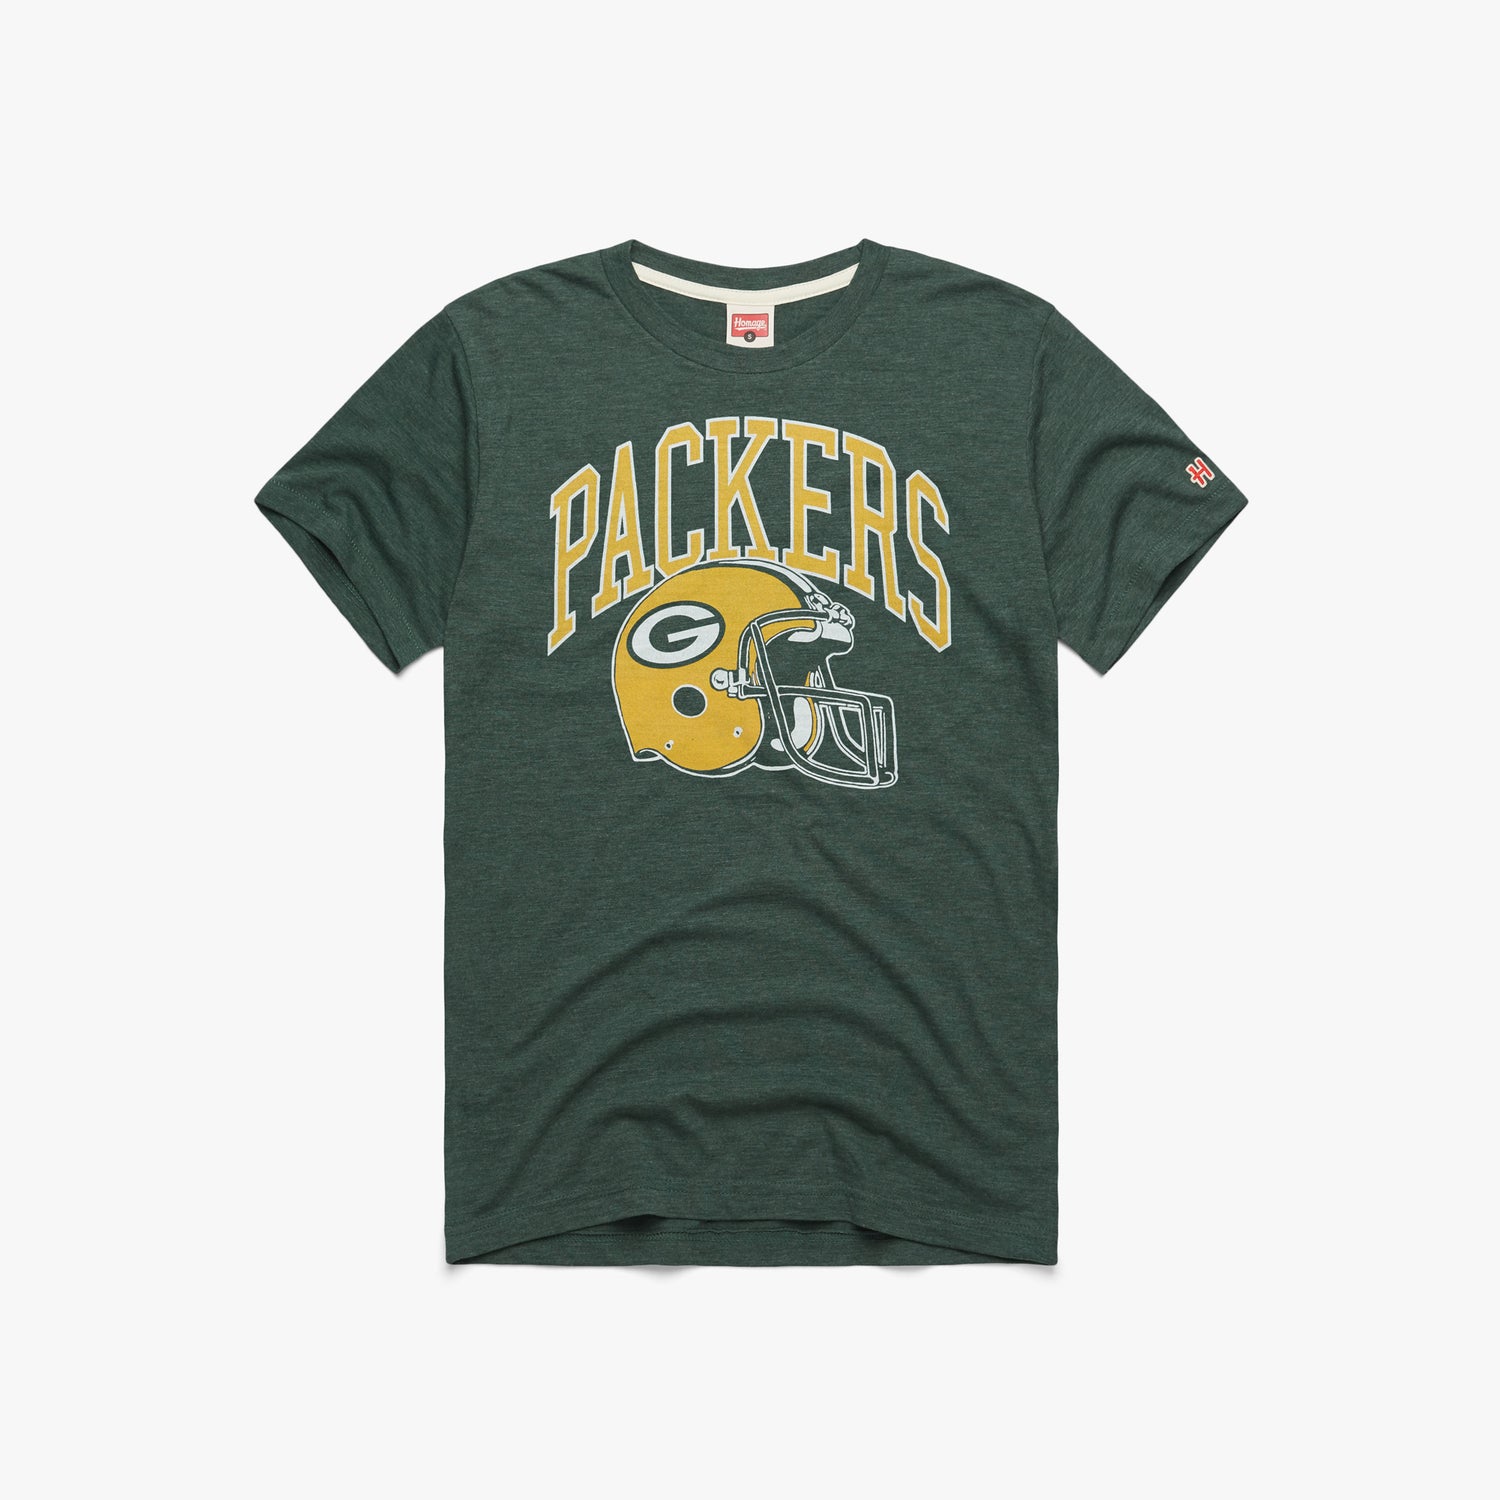 Green Bay Packers Throwback Jerseys, Vintage Jersey, Packers Retro